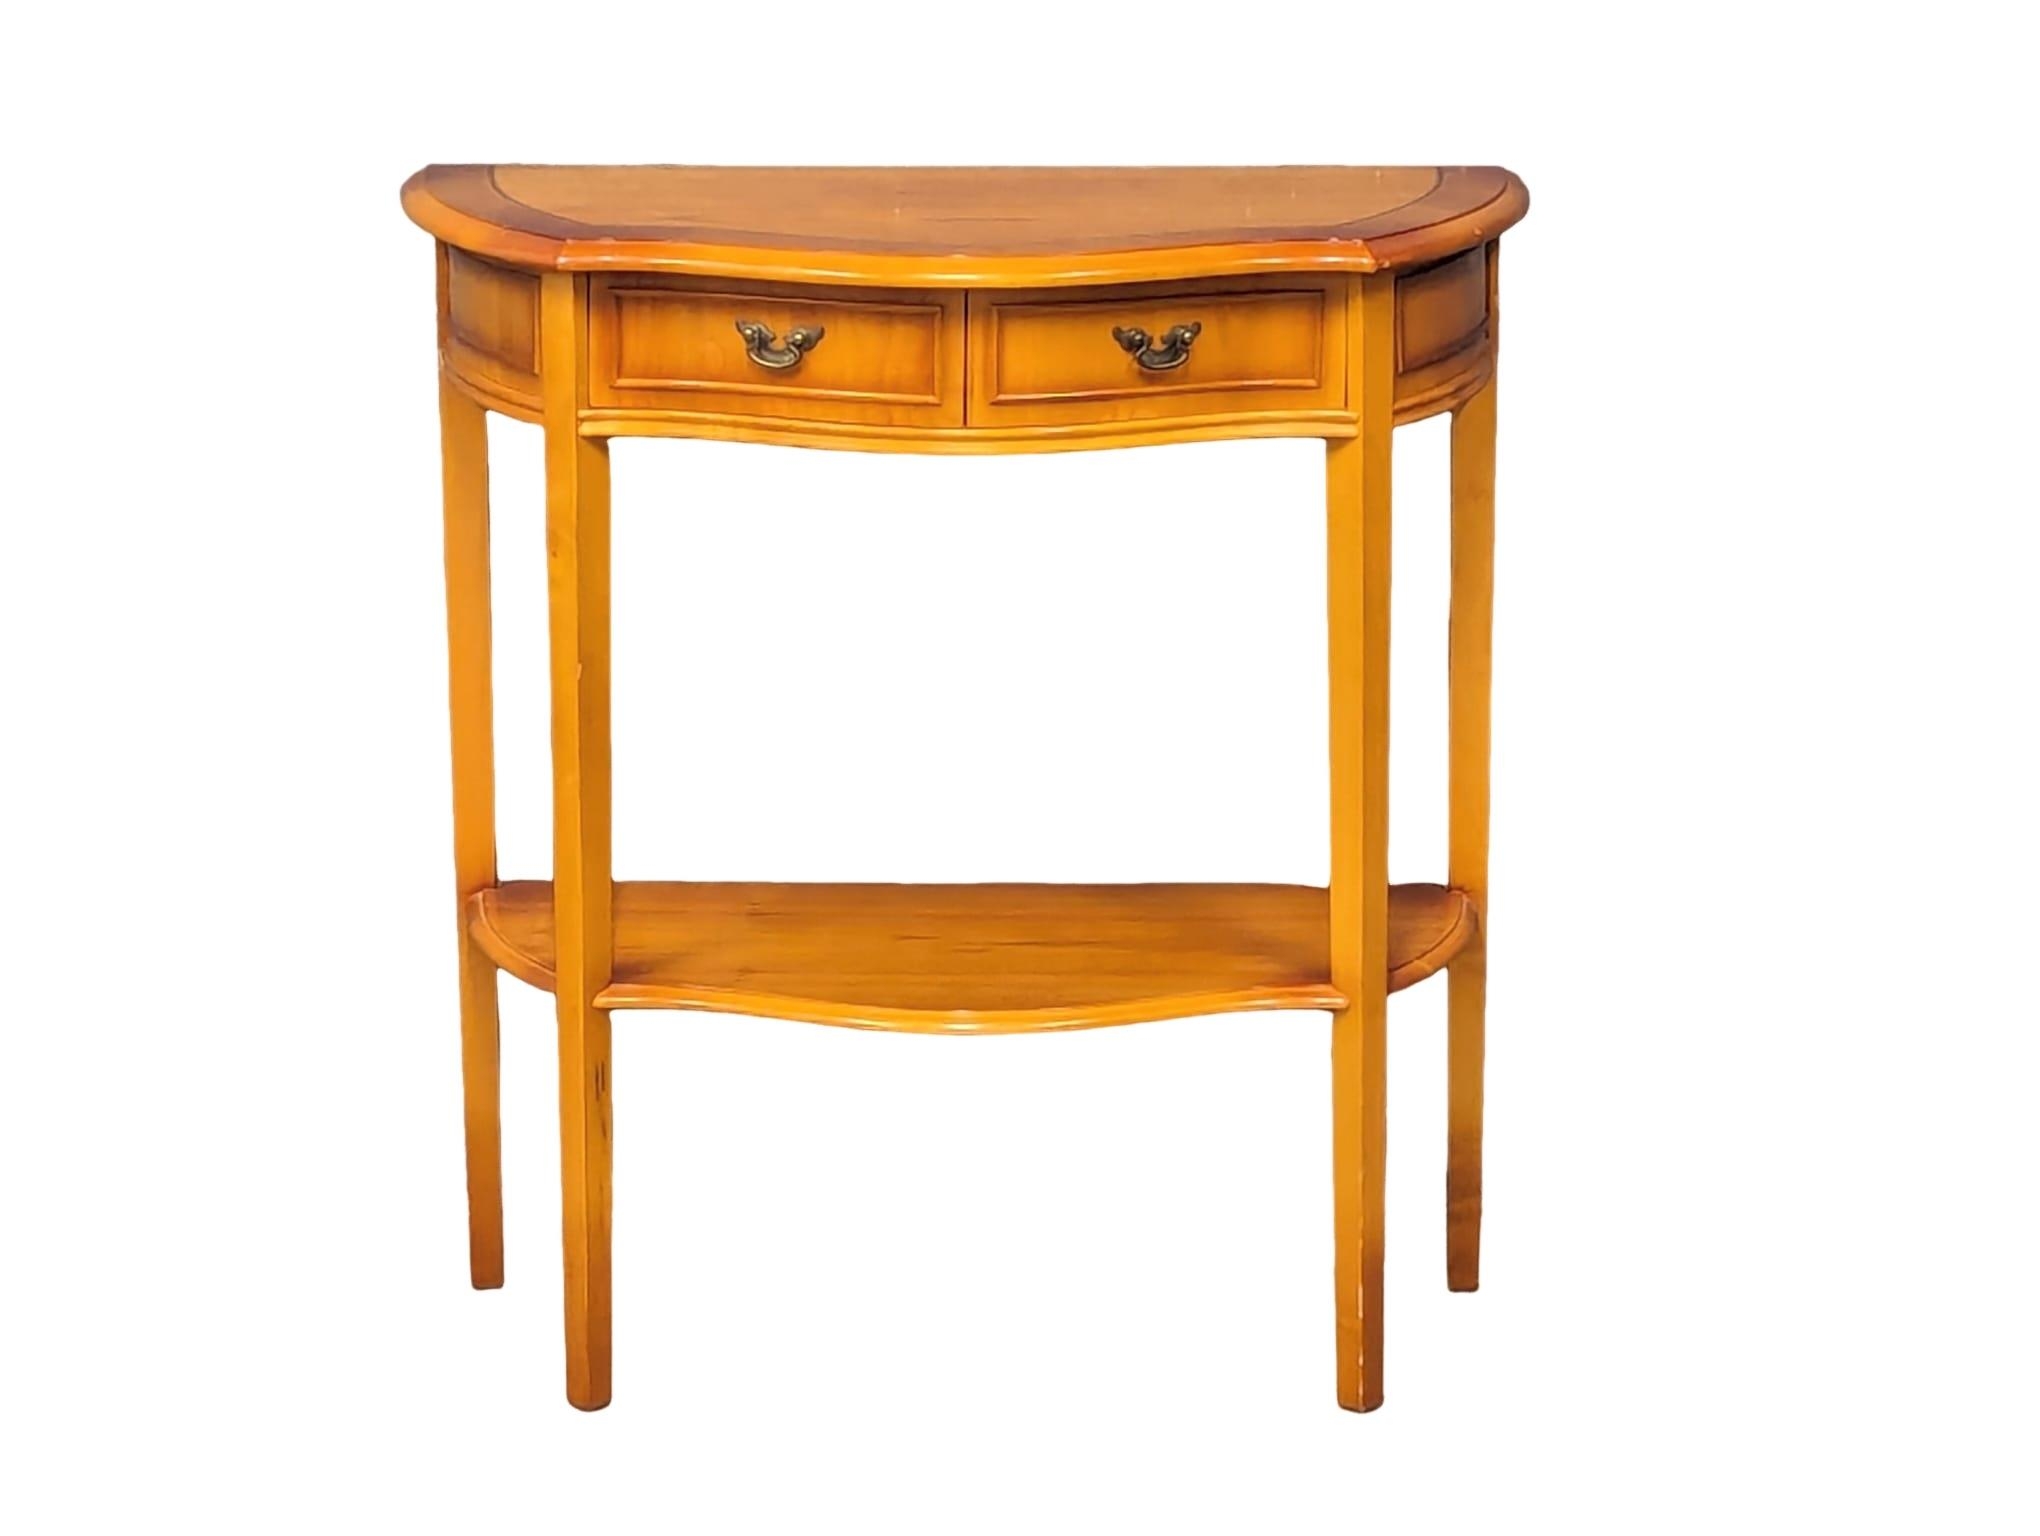 A yew wood Serpentine front hall table with 2 drawers. 72x35x75xm